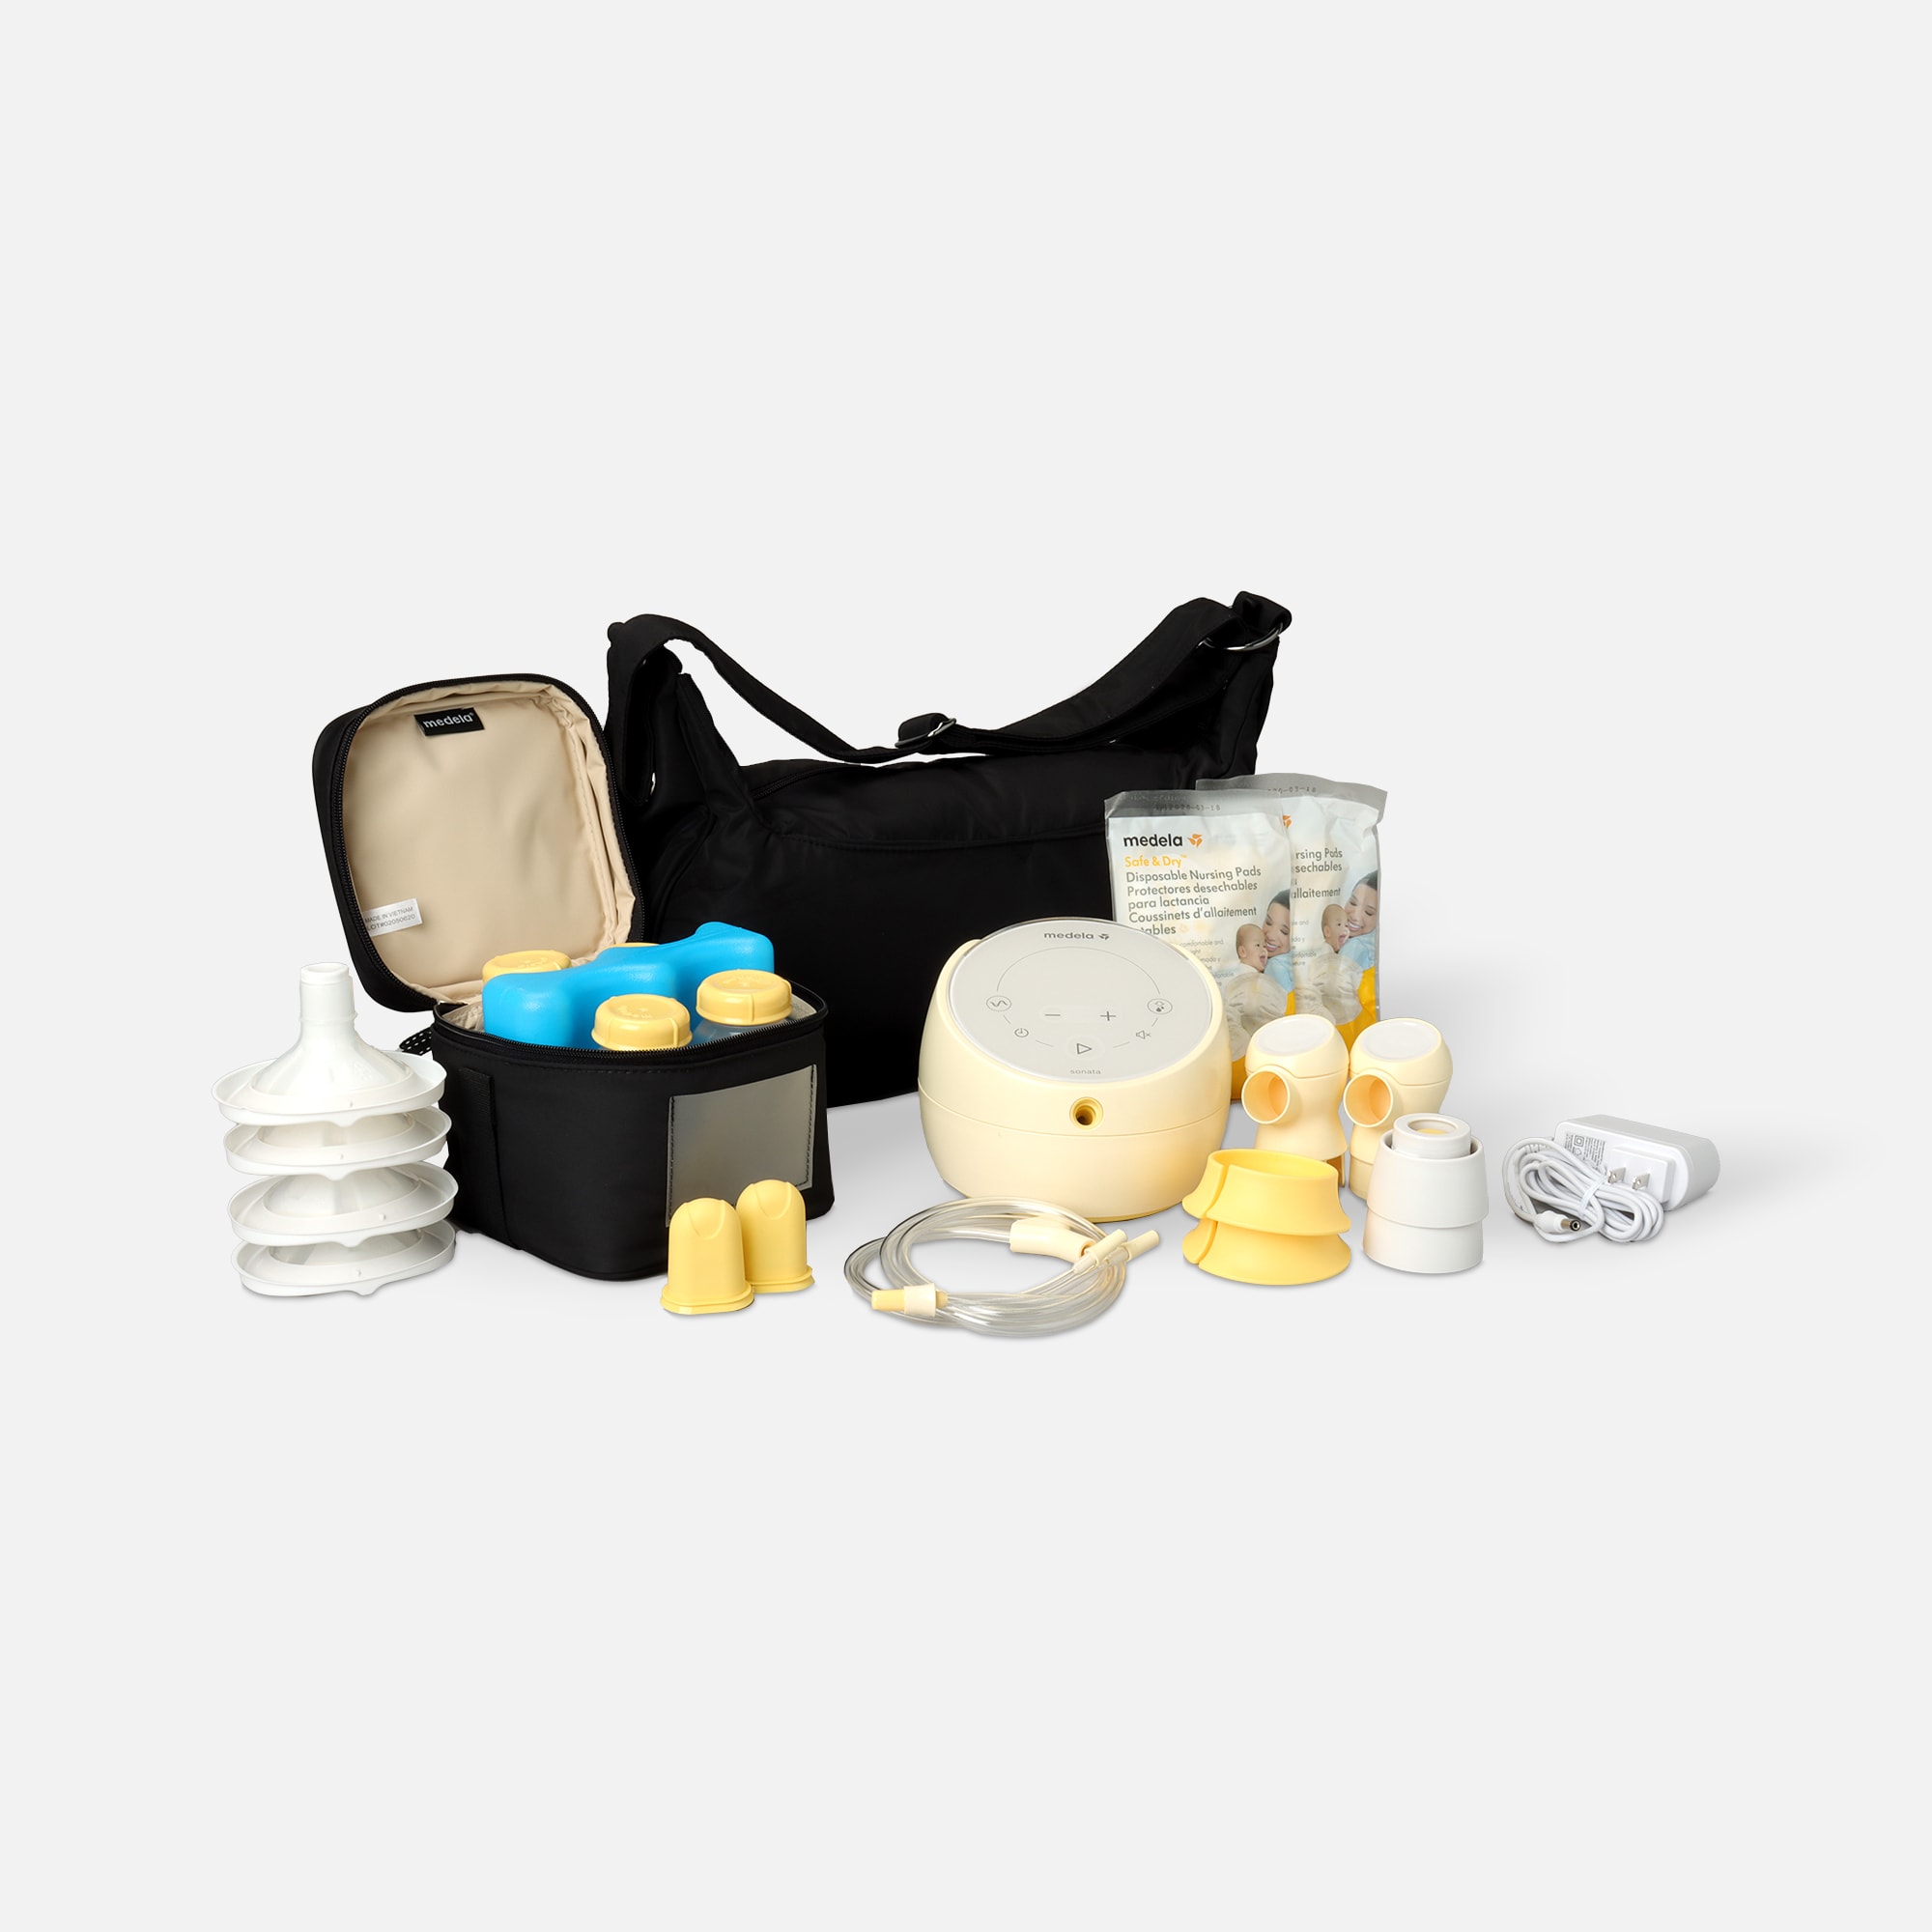 https://www.welldeservedhealth.com/on/demandware.static/-/Sites-hec-master/default/dw5dfbb31e/images/large/medela-sonata-smart-breast-pump-with-breast-shields-29667-6.jpg